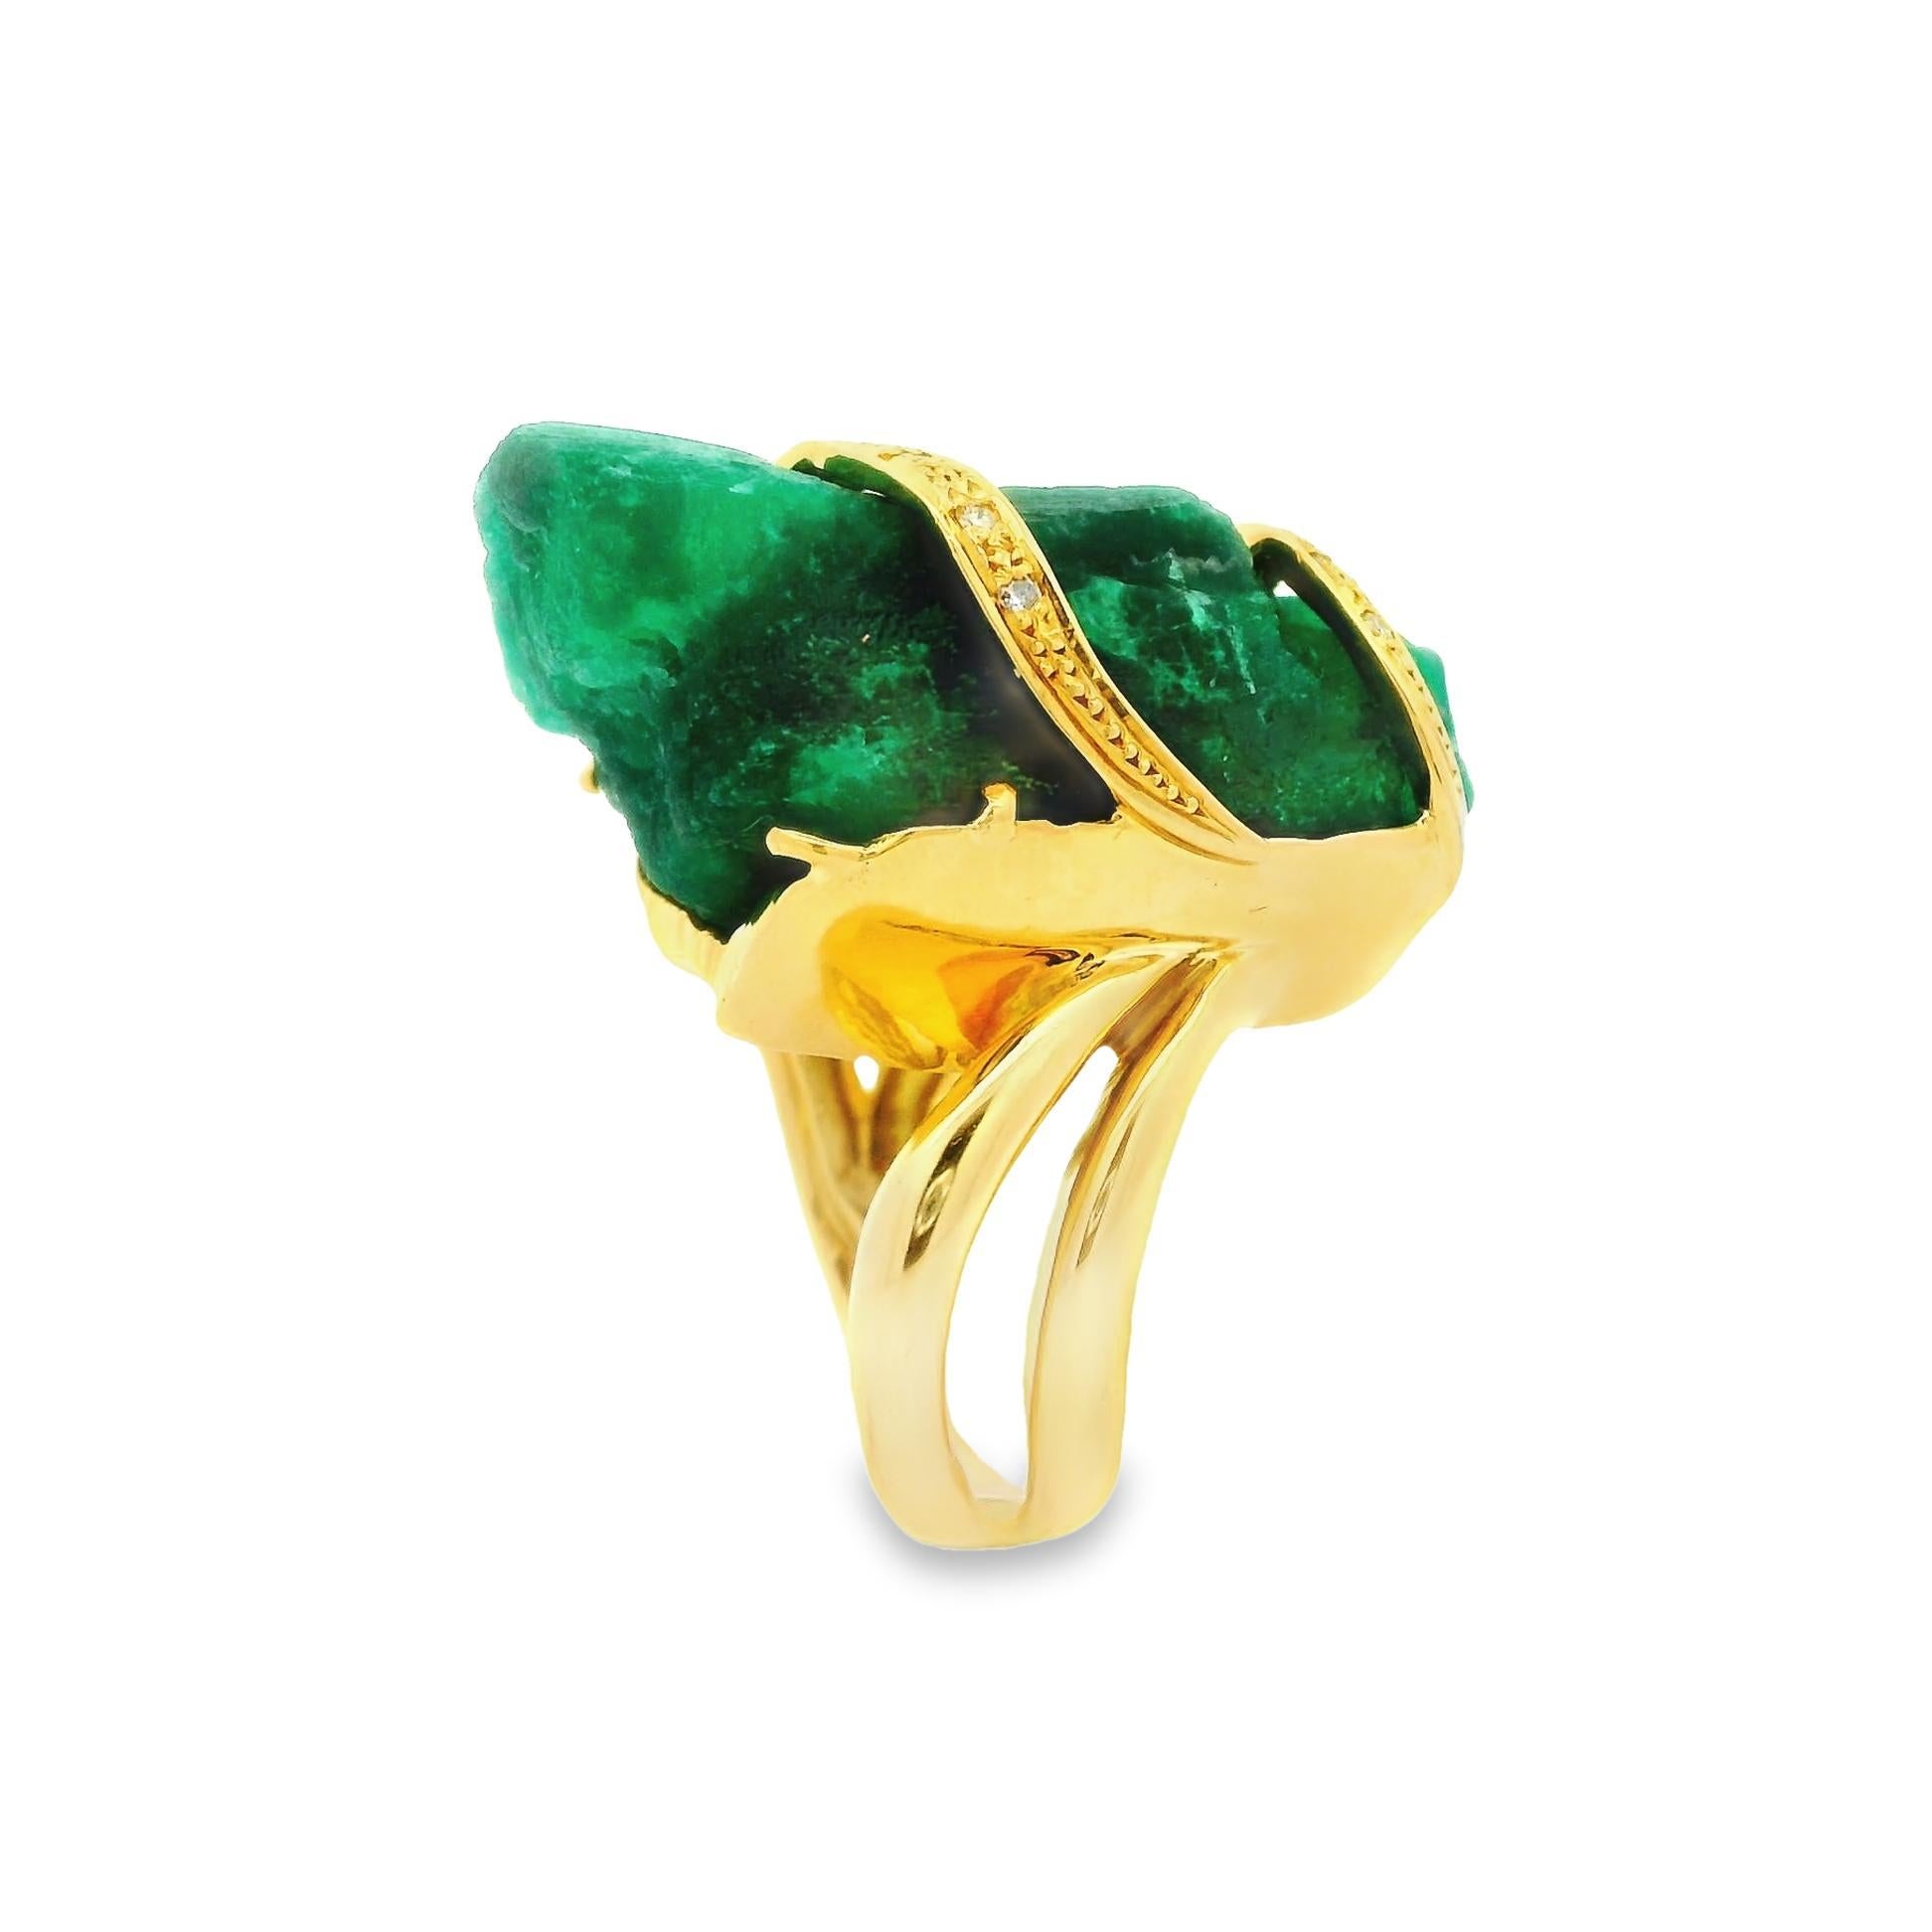 This massive 45.26 carat Emerald Crystal has been dough from the ground and set in the ring in its natural unpolished form! The unpolished and uncut emerald is for ring collectors who prefer a unique one-of-a-kind piece to wear. 18K yellow gold is